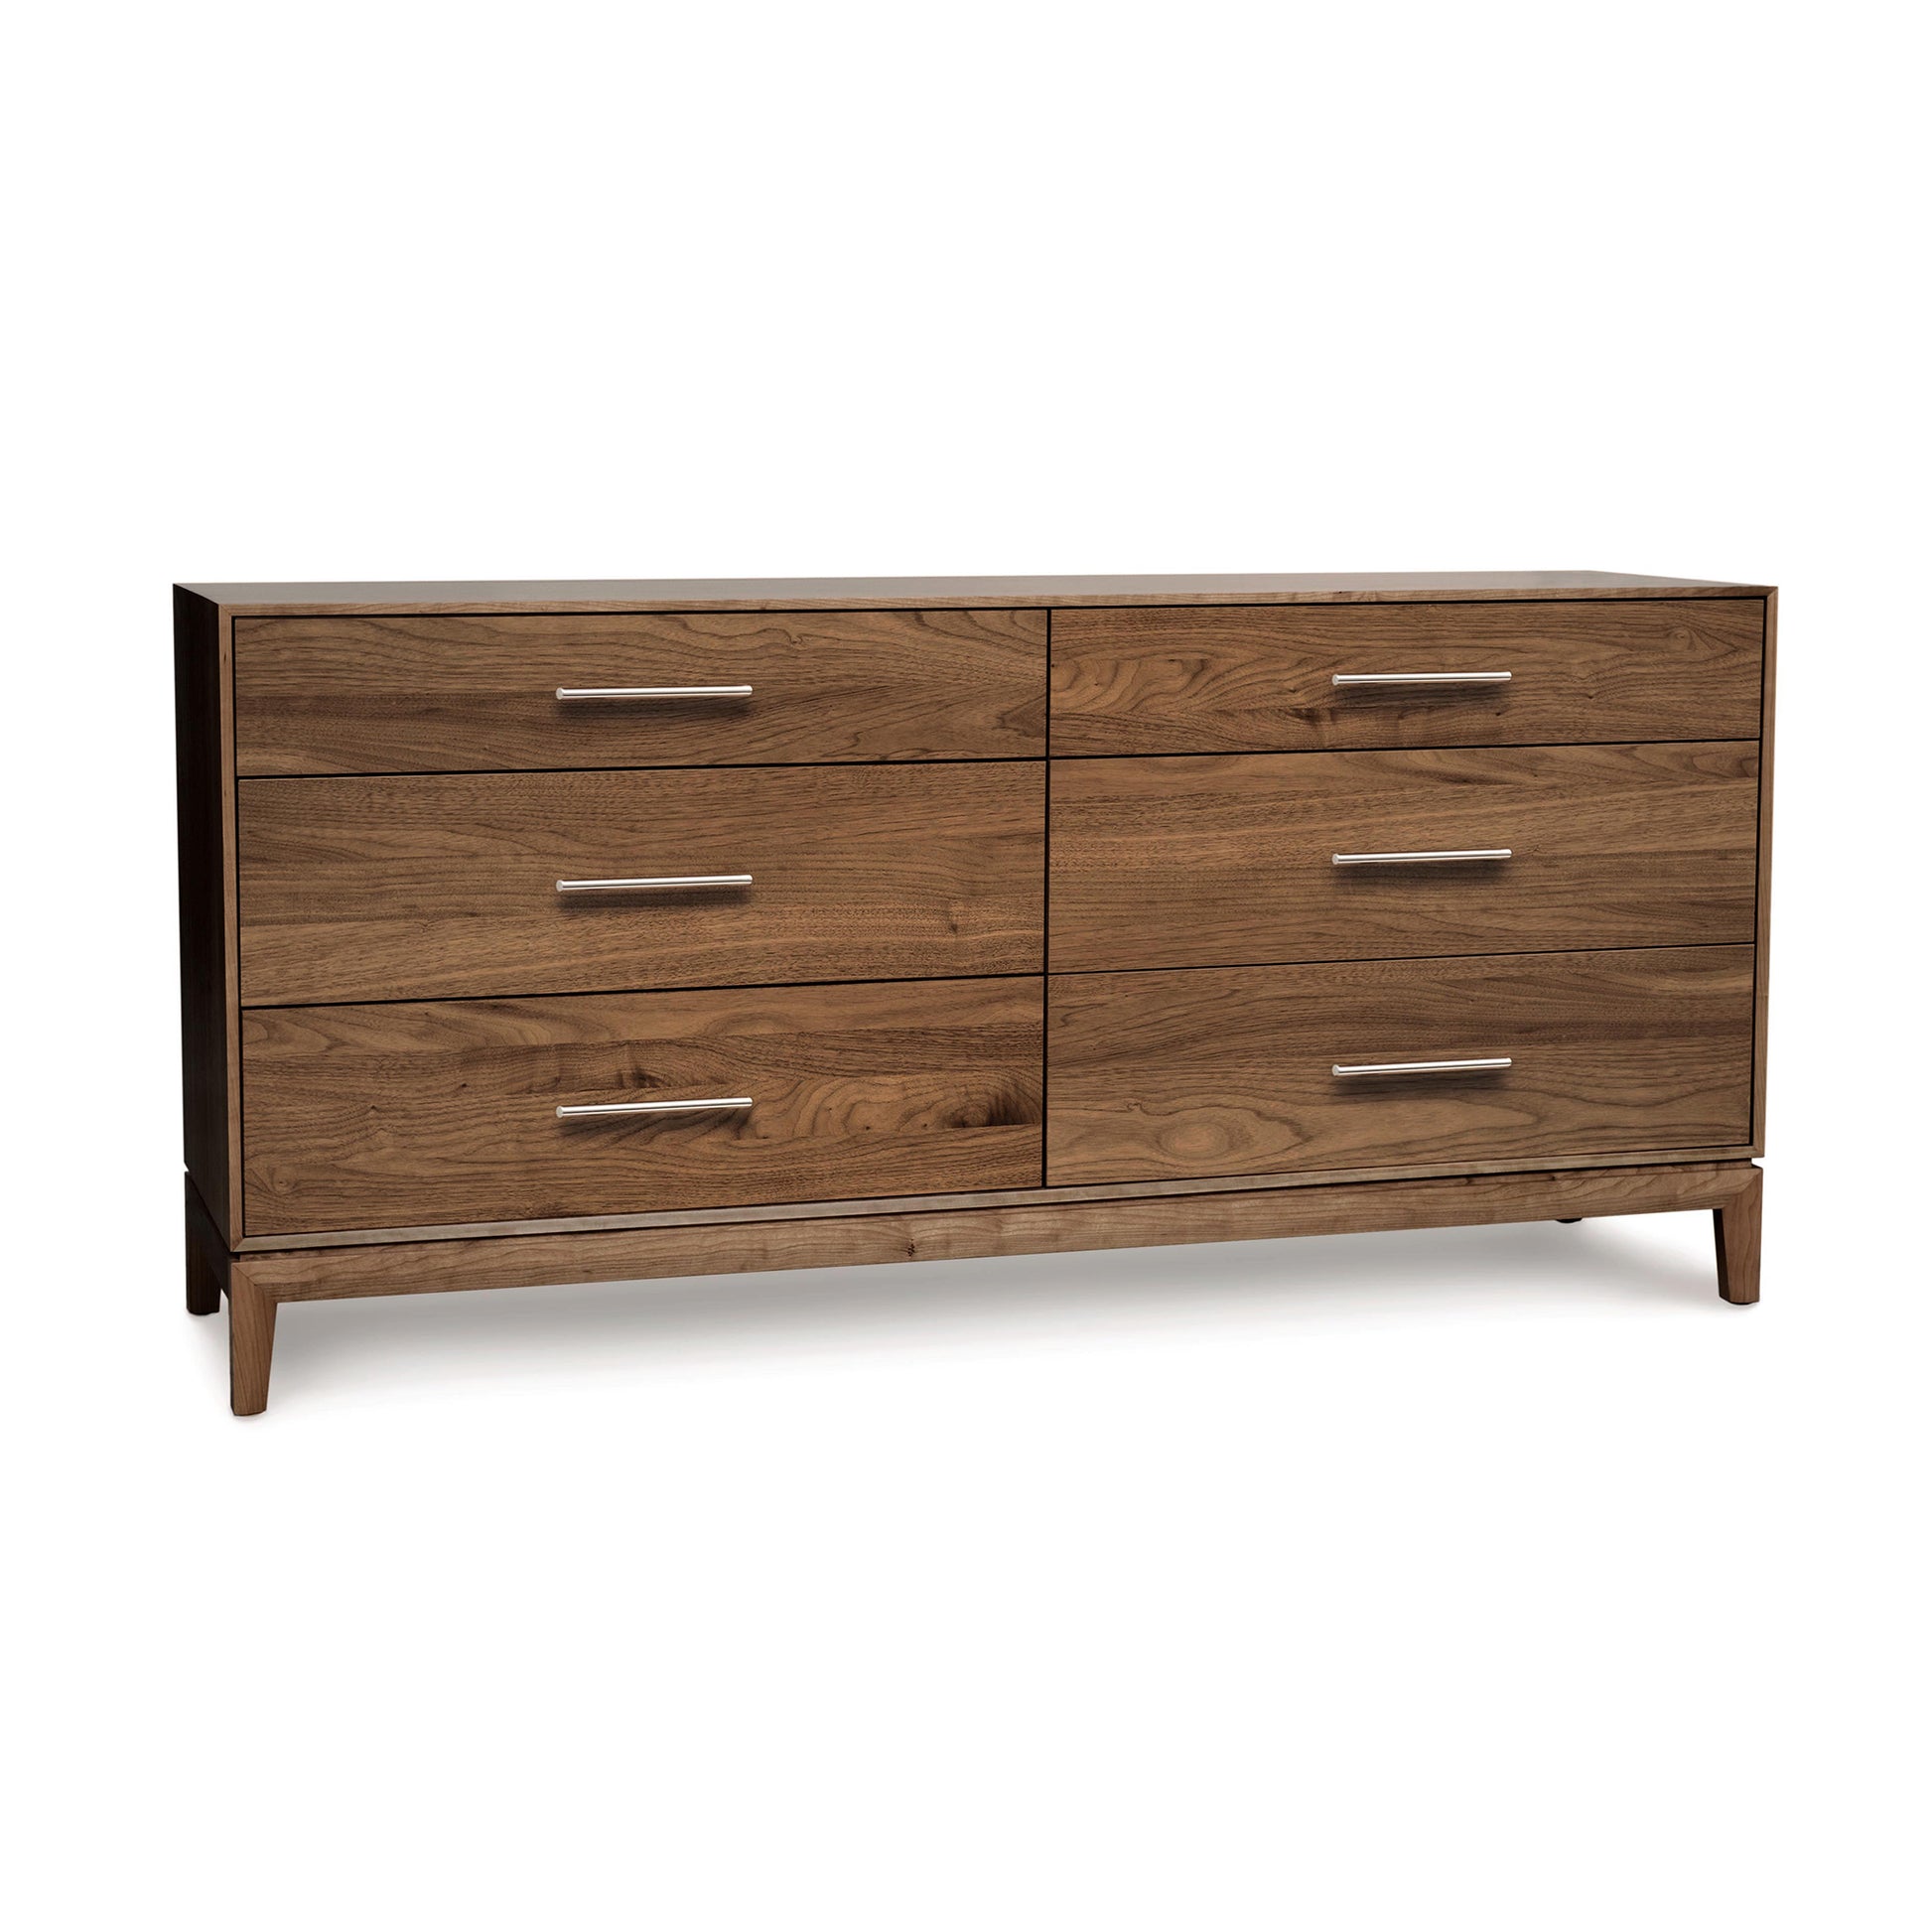 A Mansfield 6-Drawer Dresser by Copeland Furniture with metal handles on a white background.